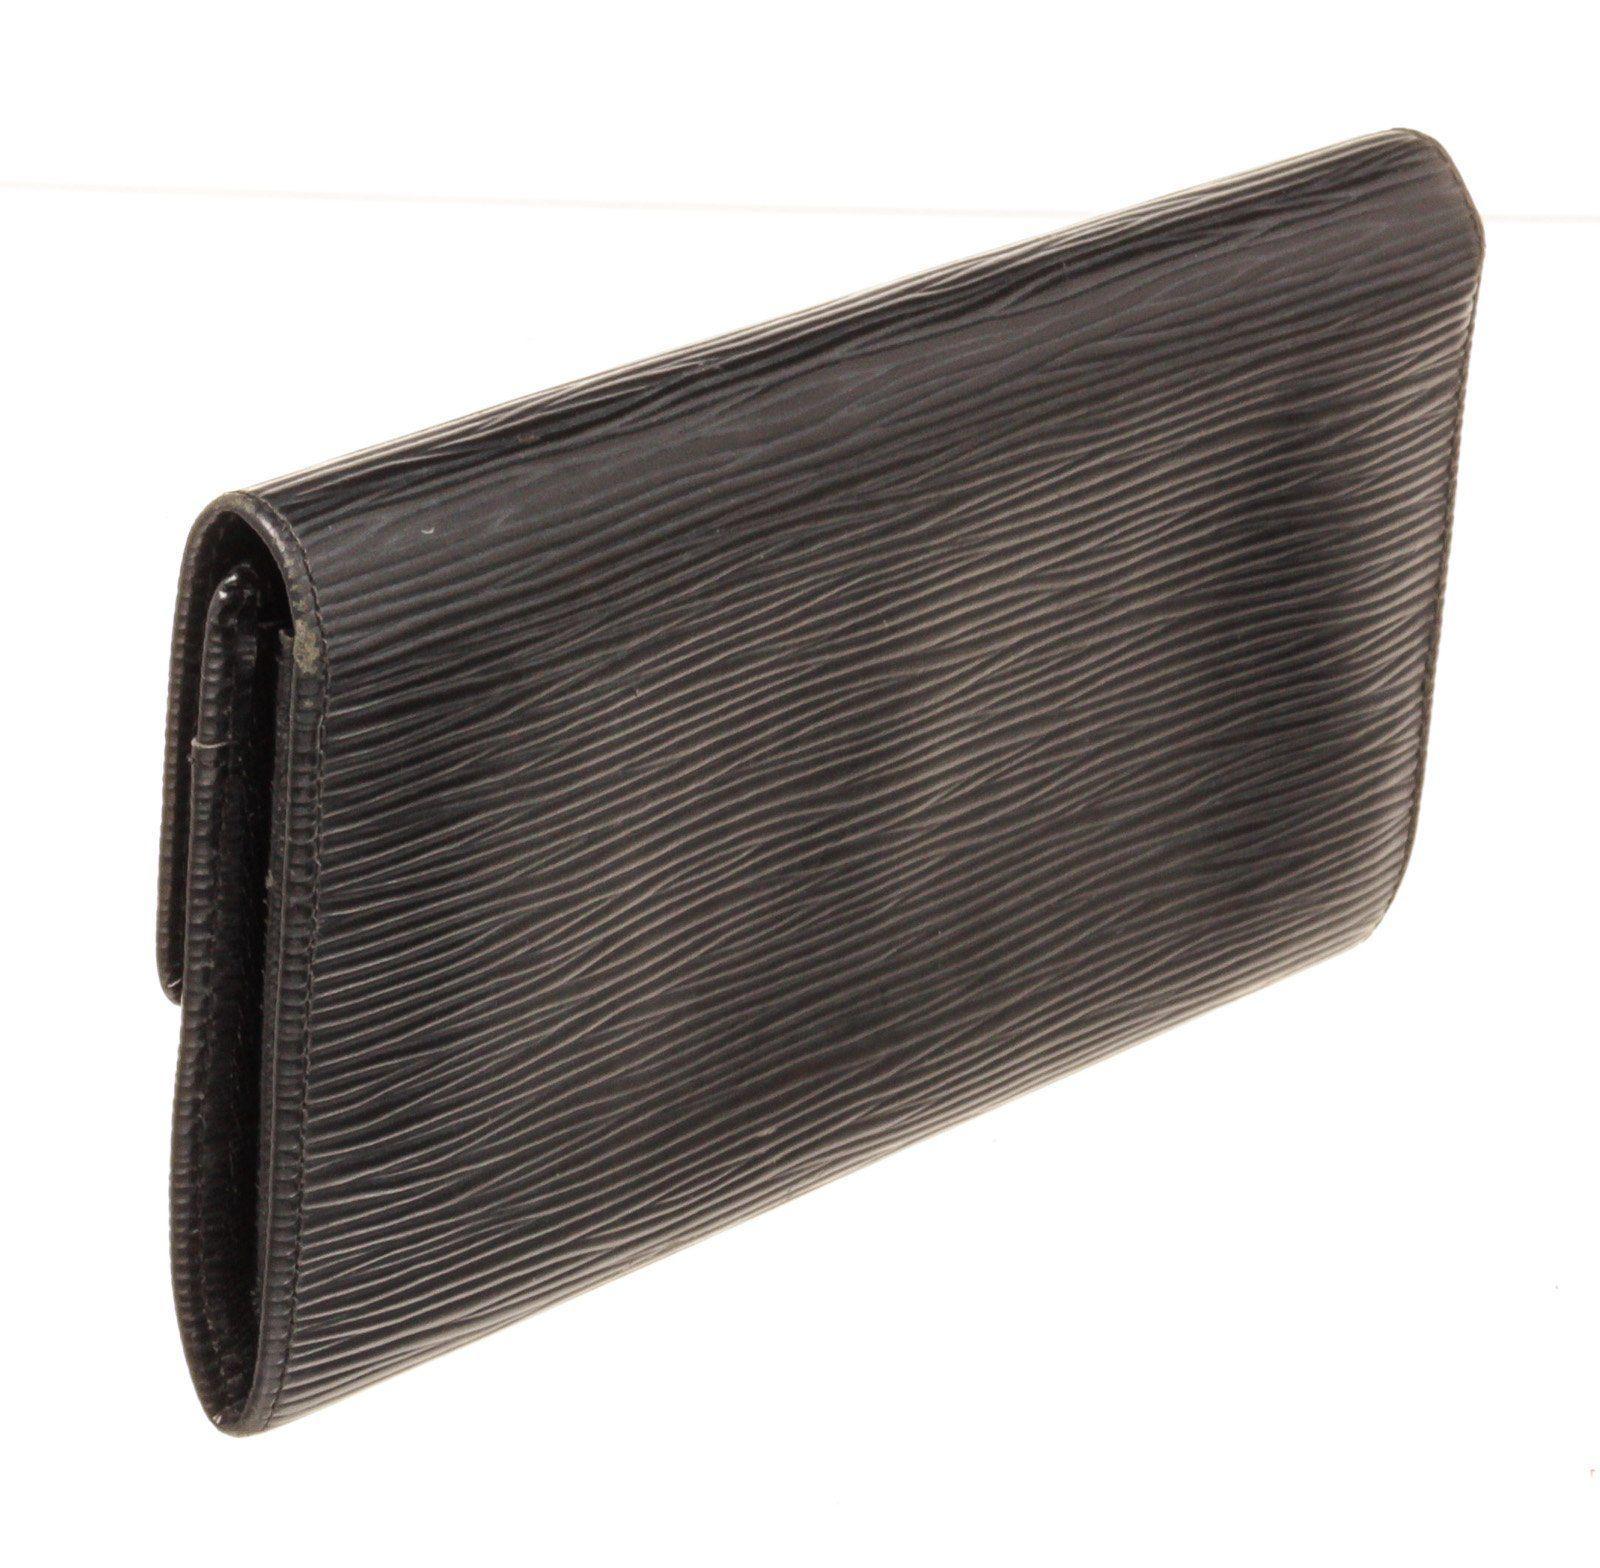 Louis Vuitton Black Epi Leather Sarah Wallet with epi leather, gold-tone  In Good Condition For Sale In Irvine, CA